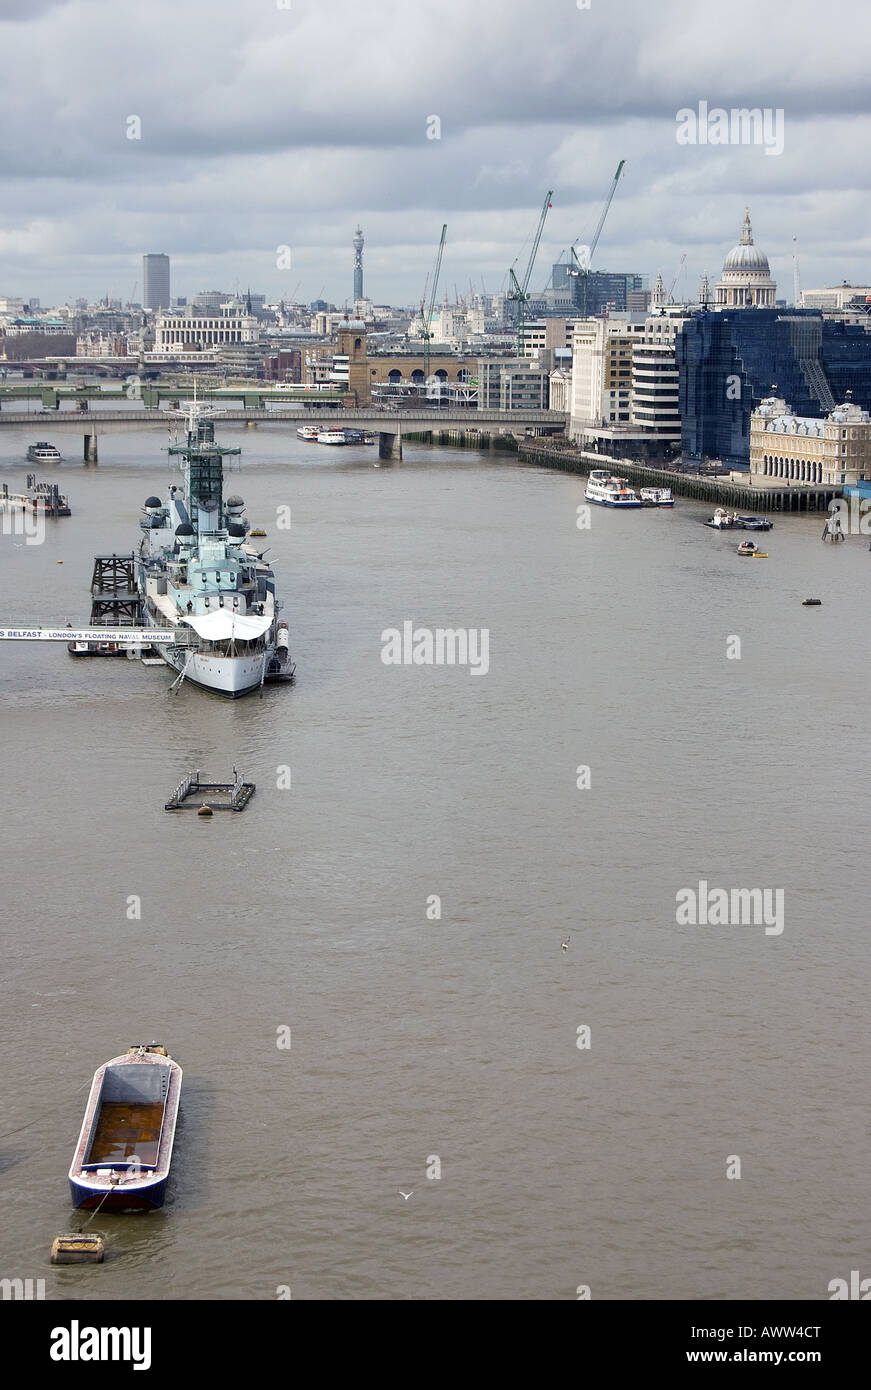 Looking west over the River Thames at central London. Stock Photo